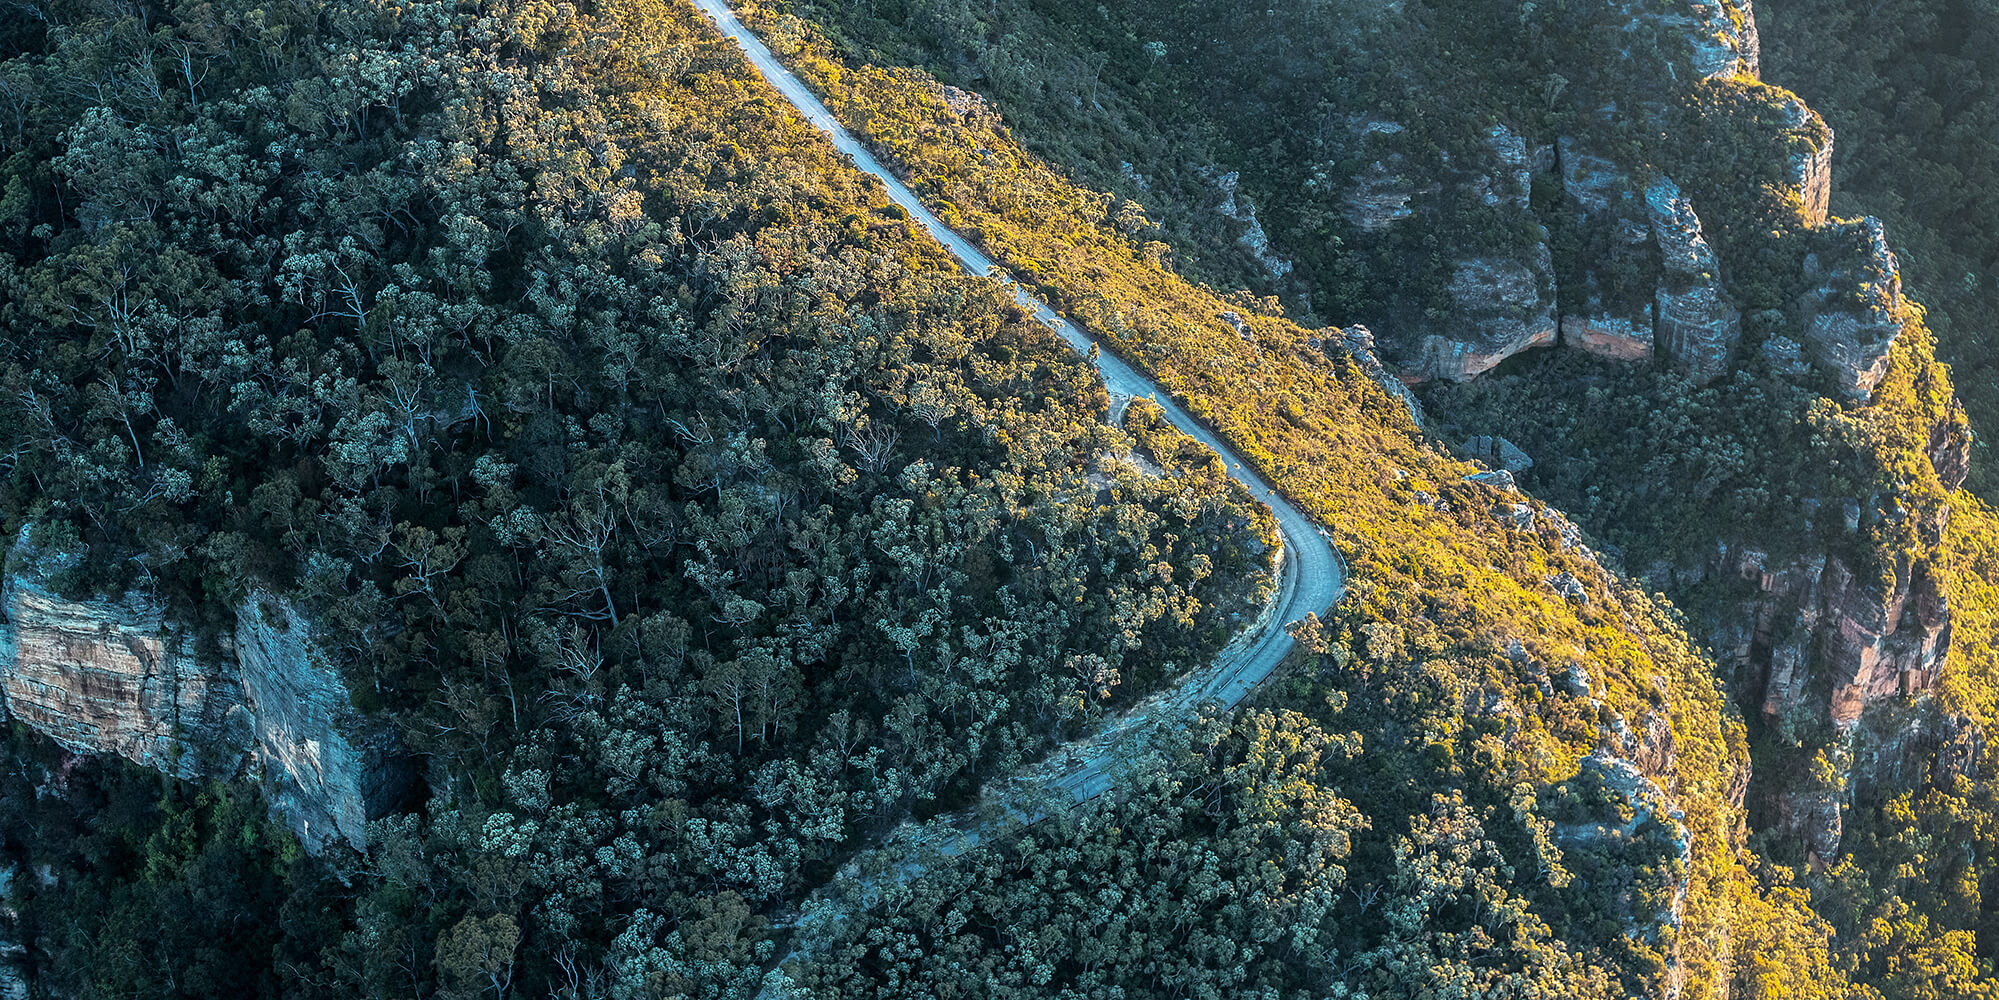 Landscape of a small road winding through the bush and rocky outcrops in the Blue Mountains National park